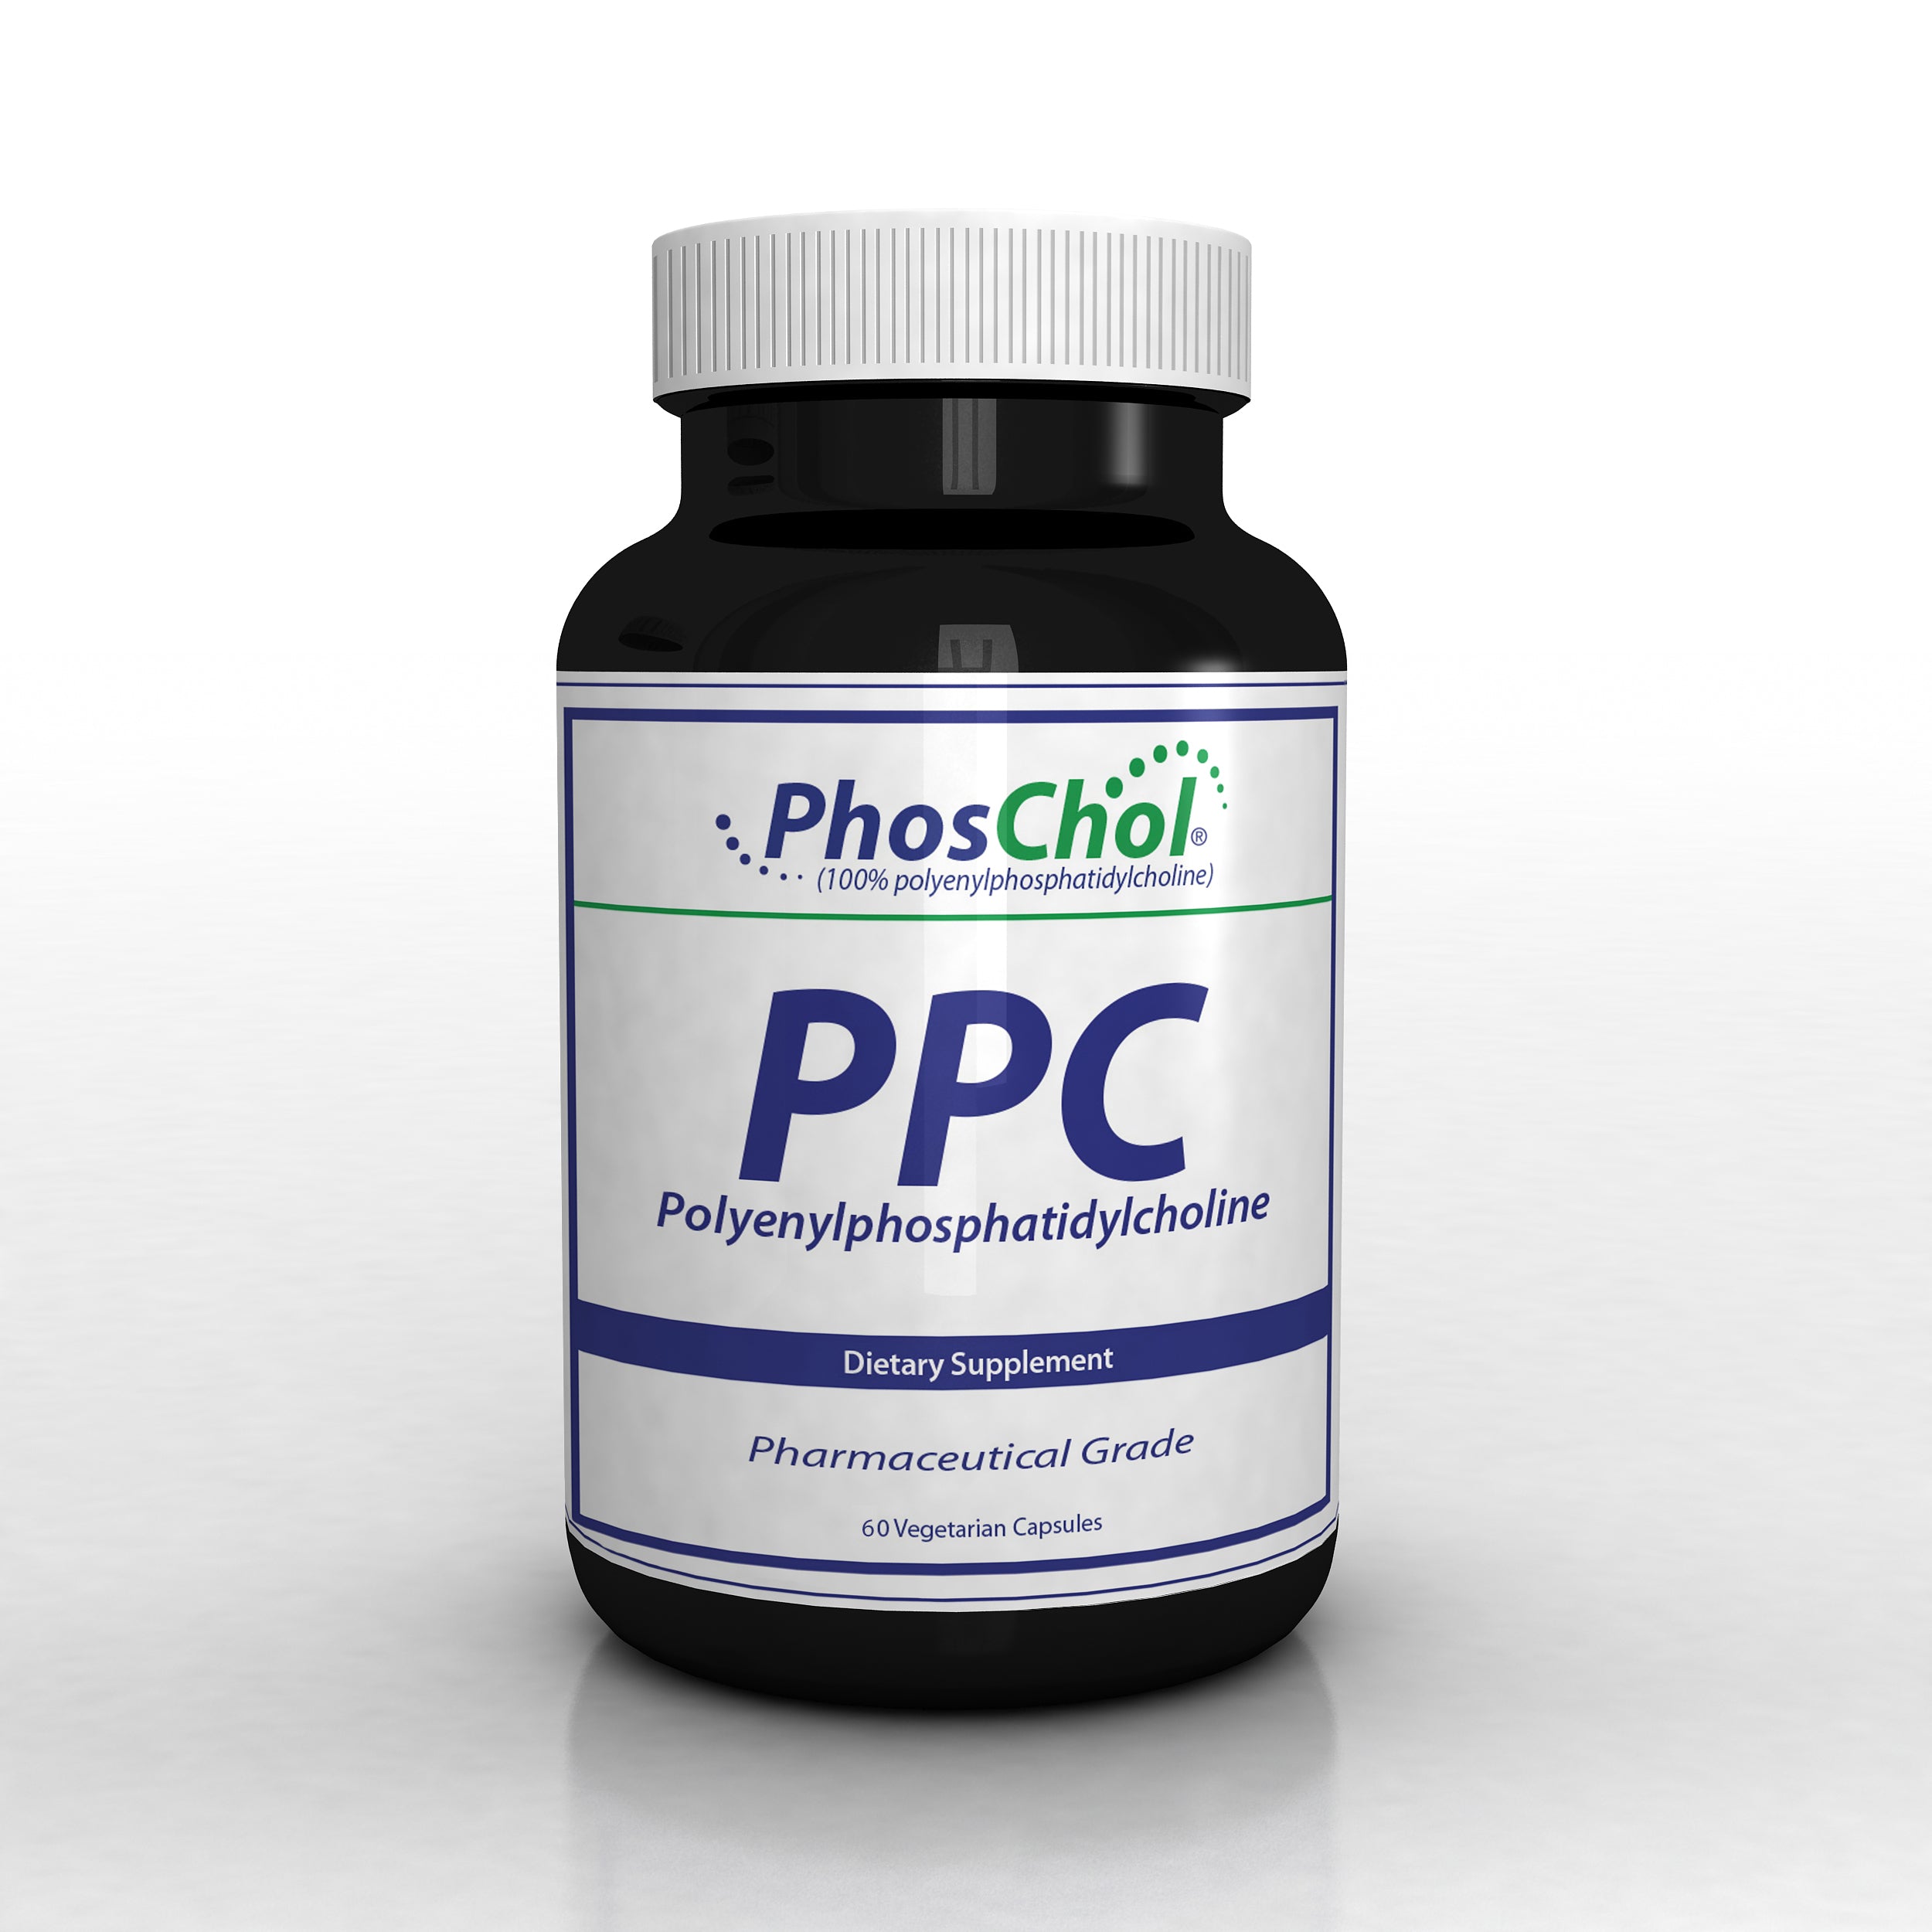 PhosChol PPC is a superior cell membrane therapeutic that supports Liver, Brain, Gut, Heart, Blood Vessels, cell metabolism, detox and more